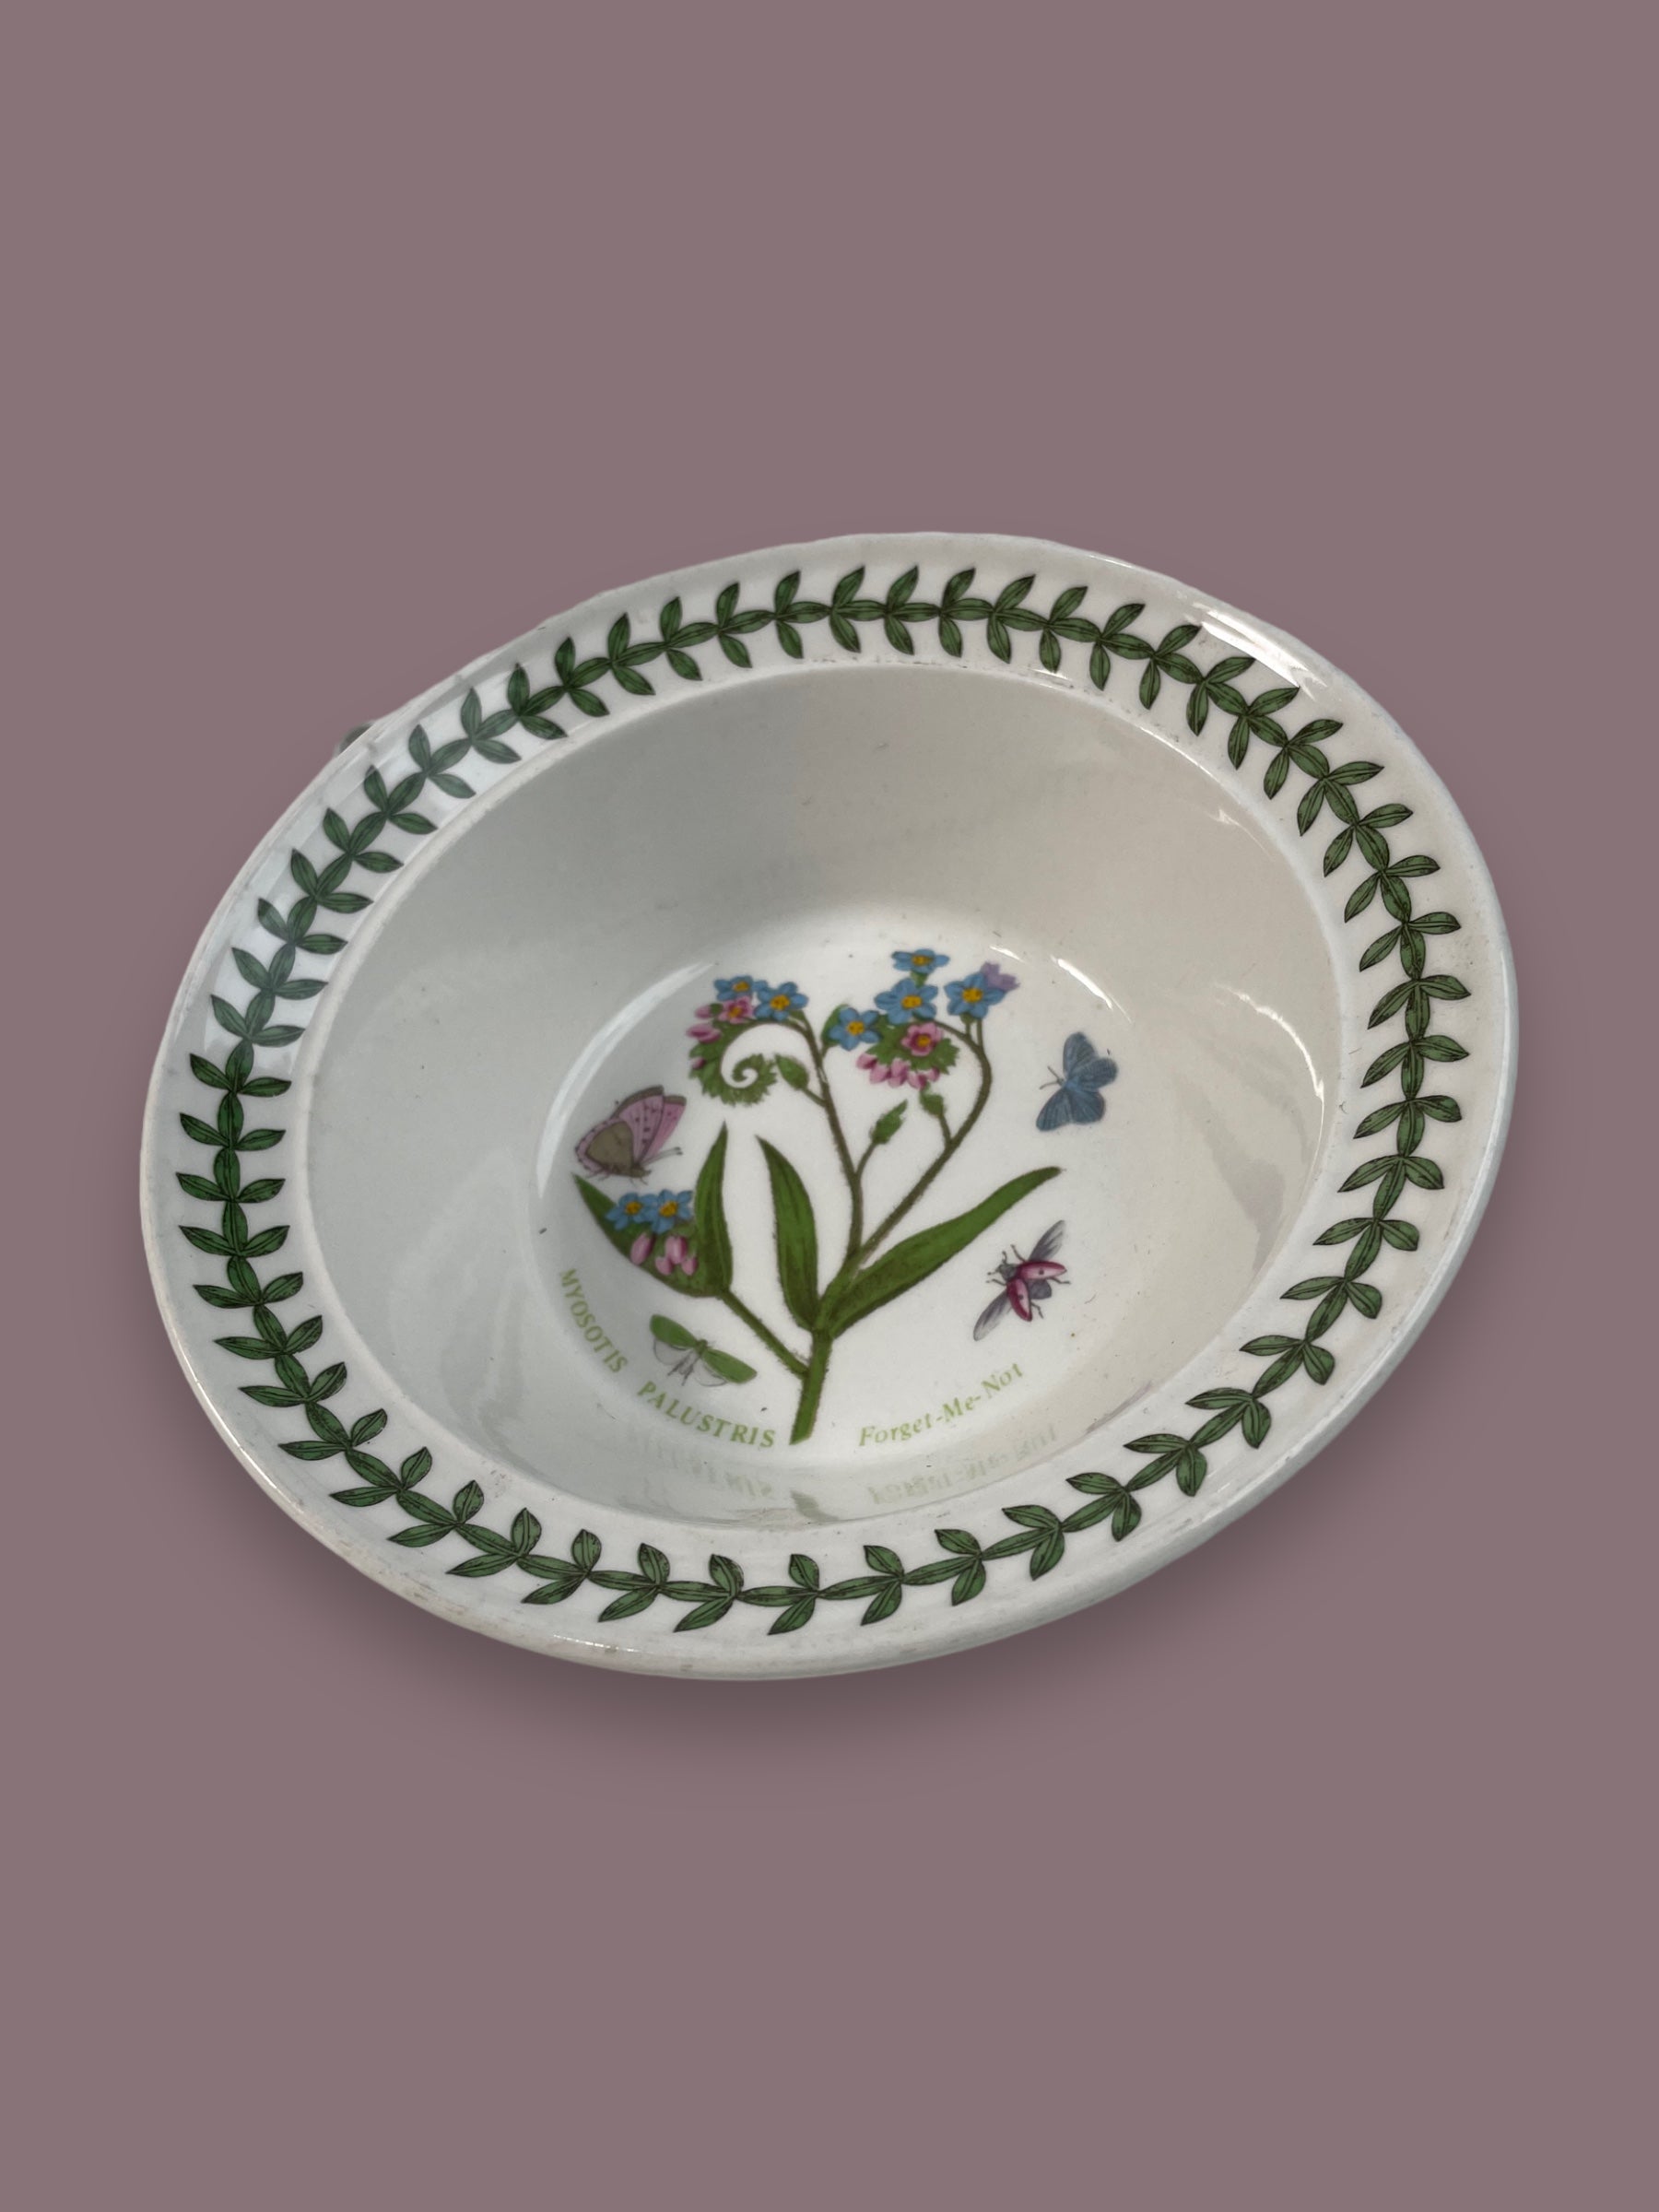 The Botanic Garden Forget-Me-Not Bowl by Portmeirion